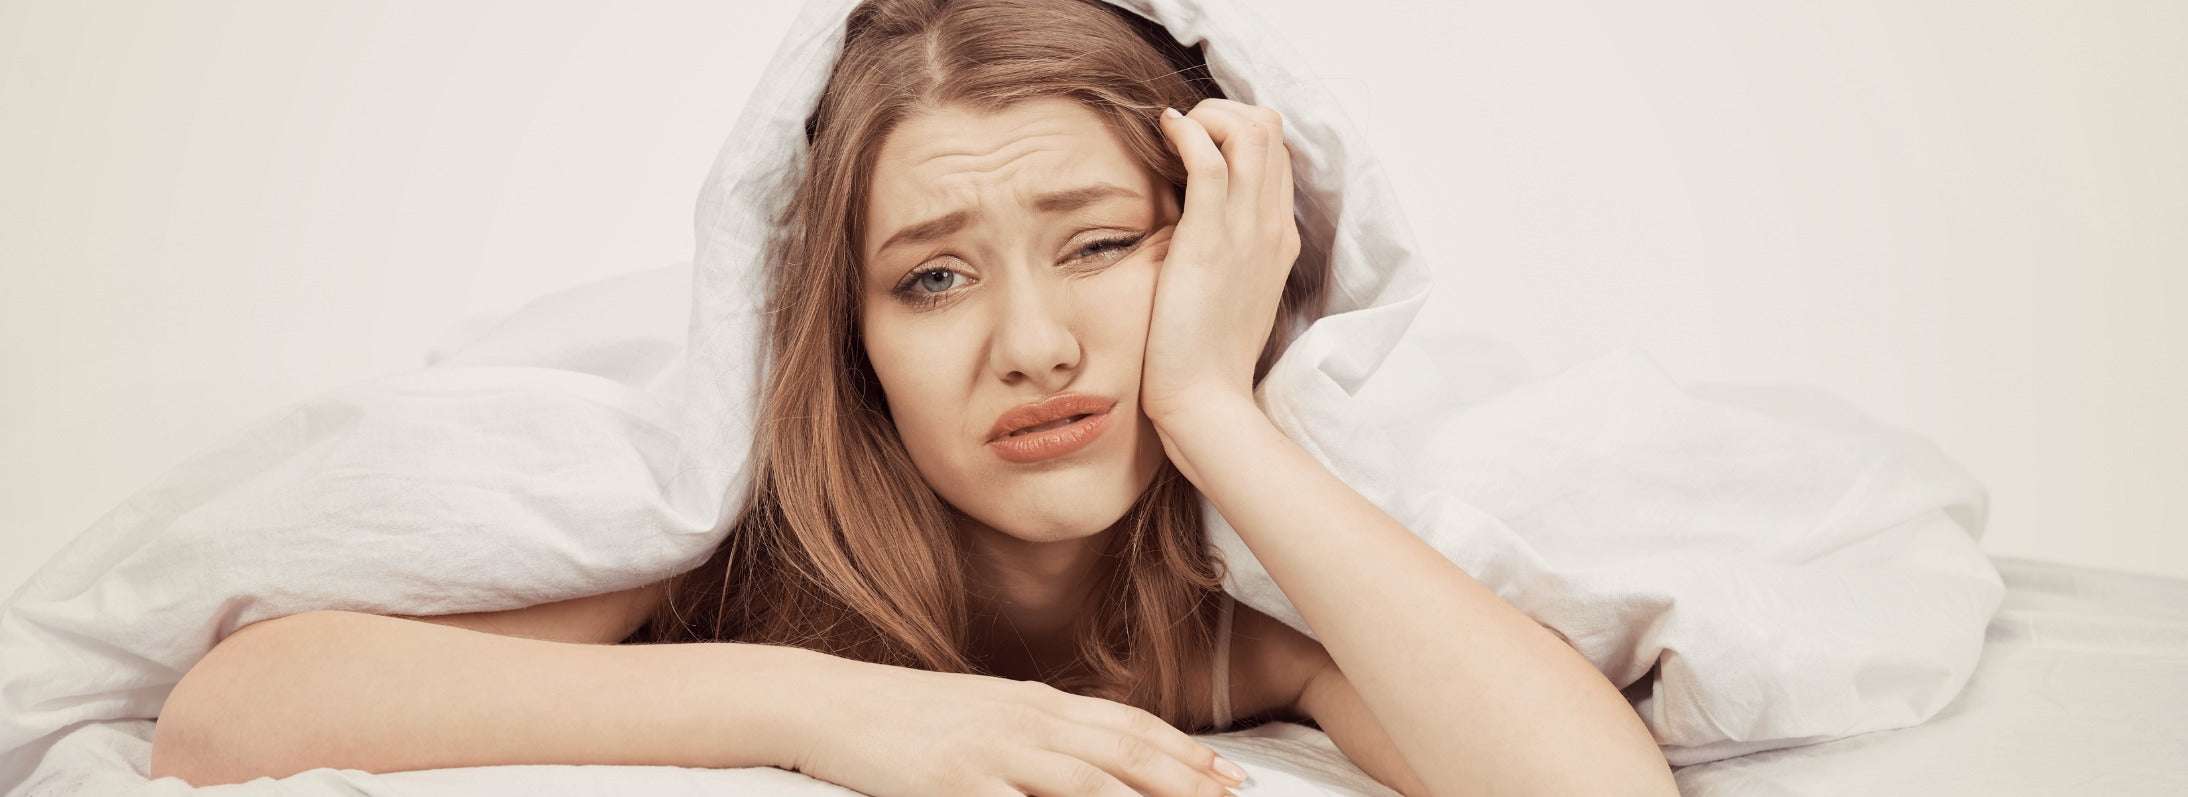 11 Reasons Why You Wake Up In The Middle of the Night